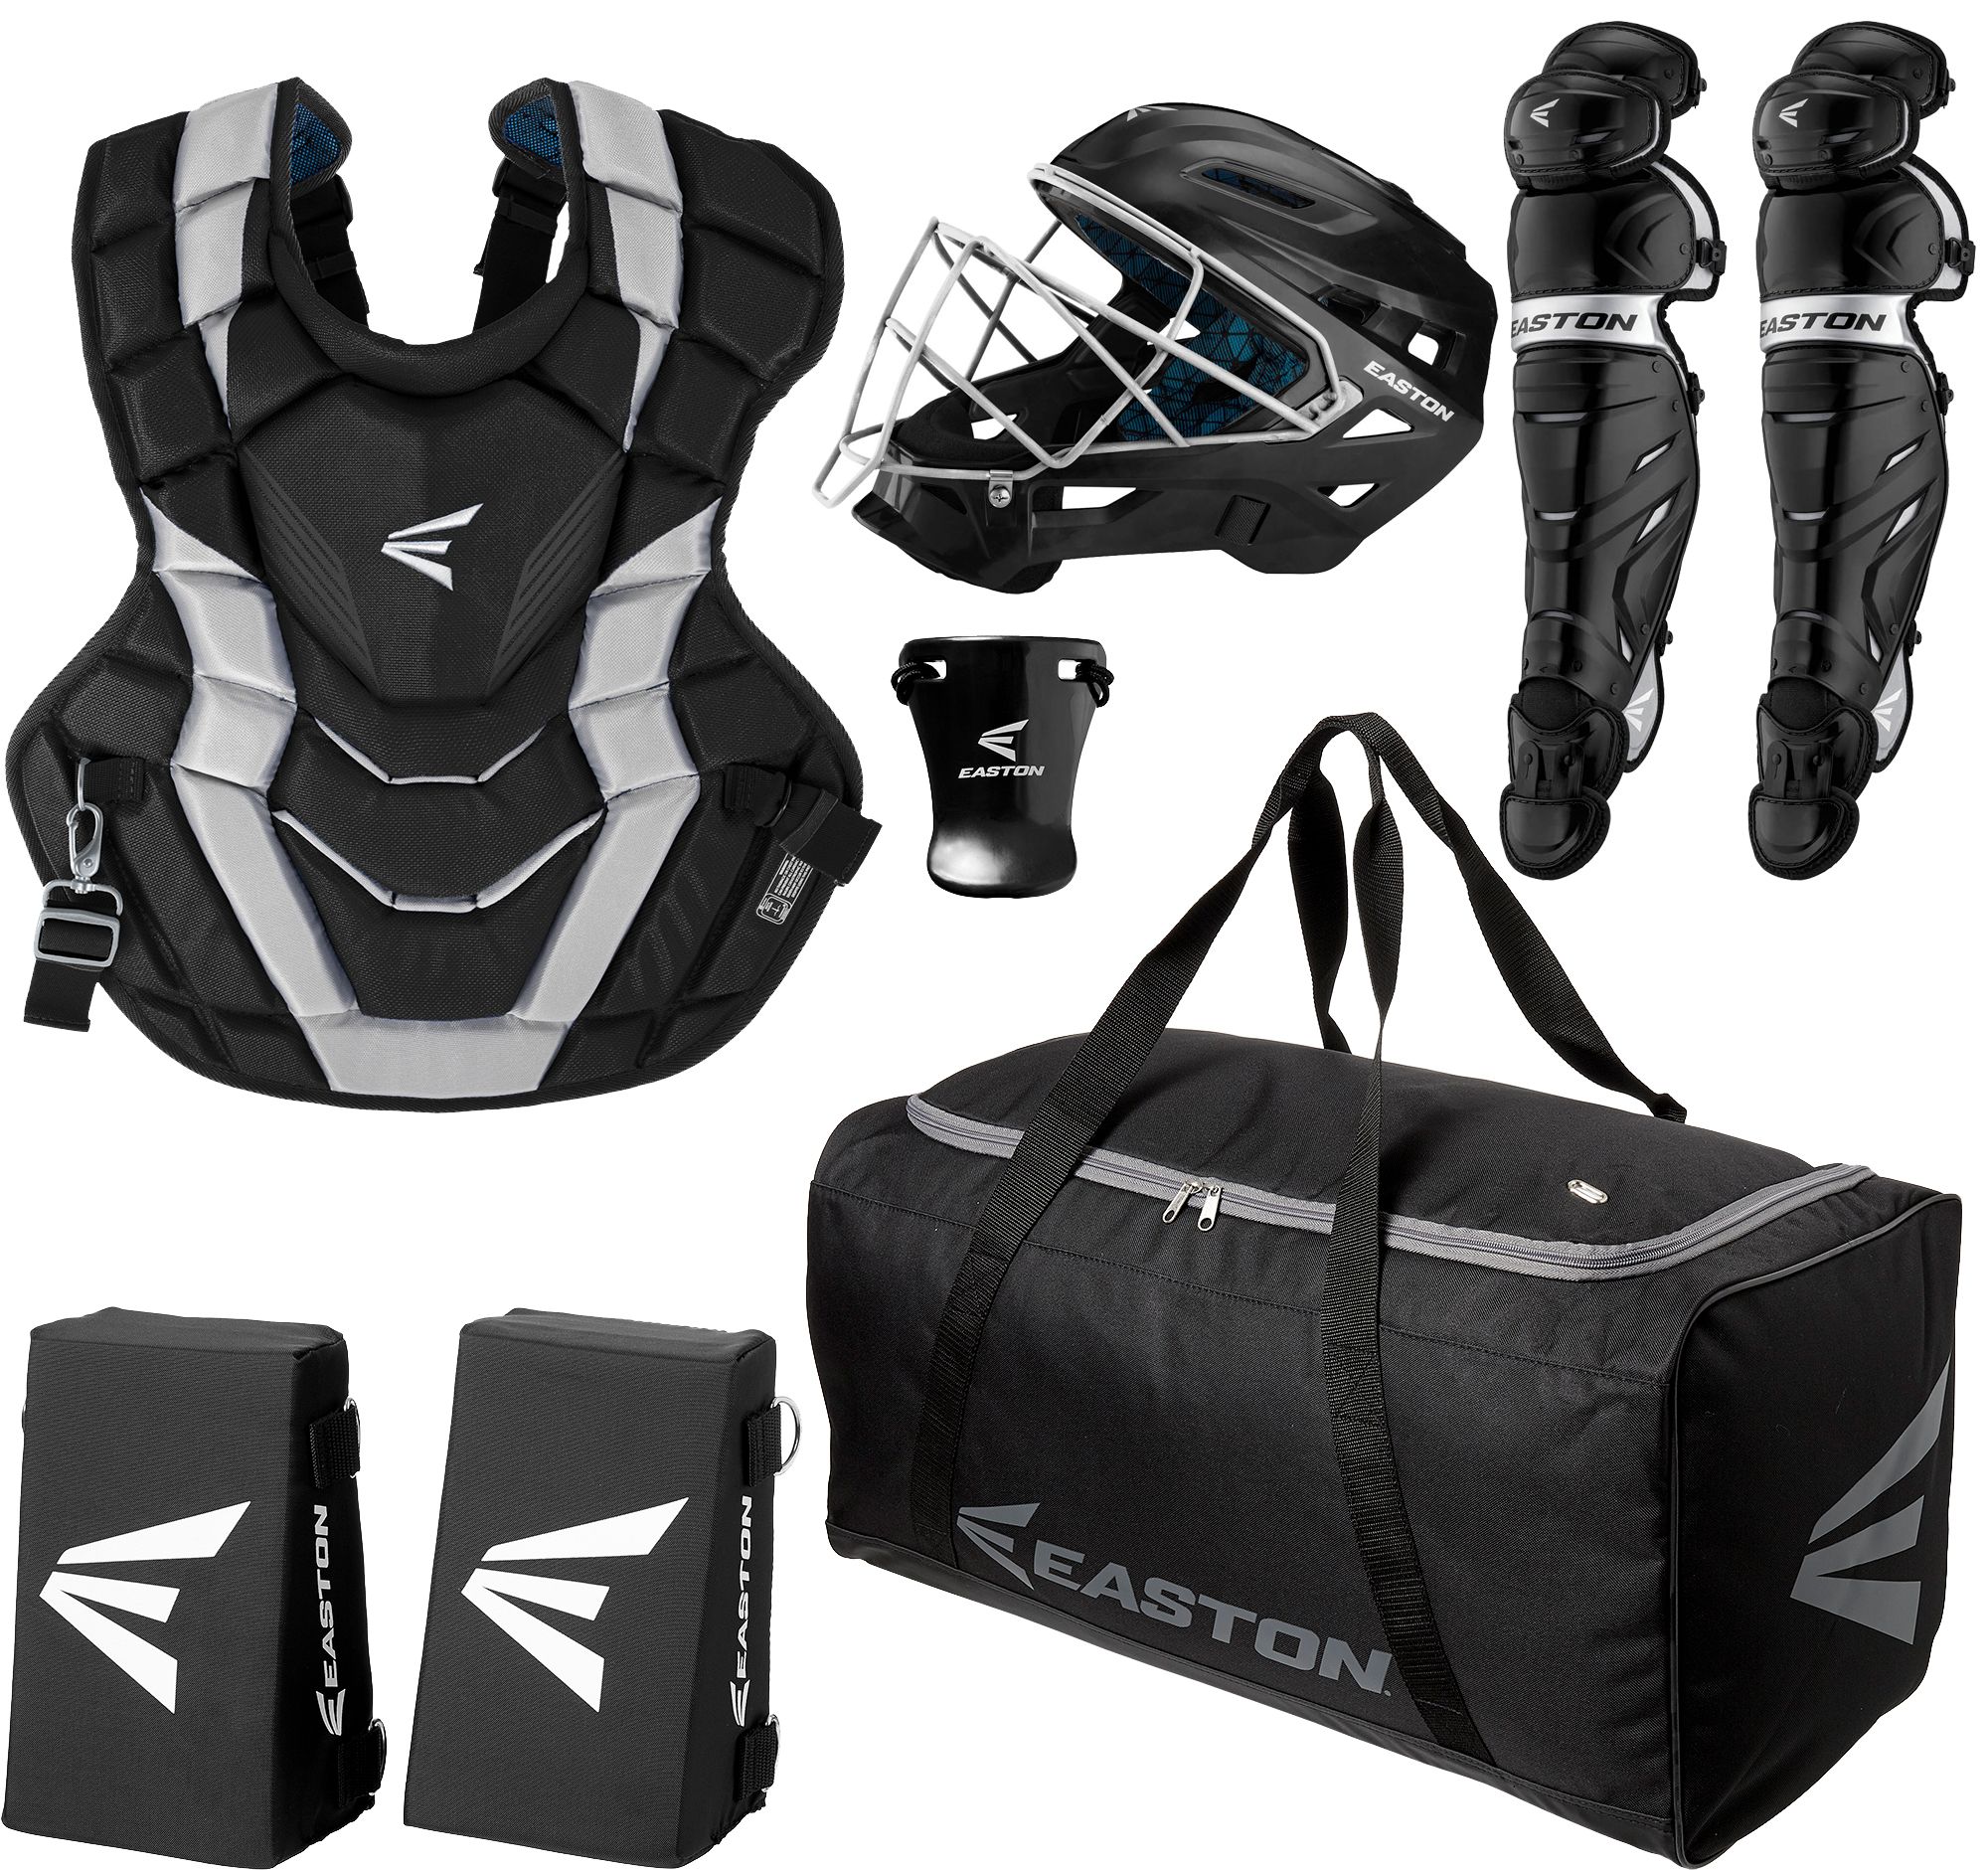 adidas youth catching gear